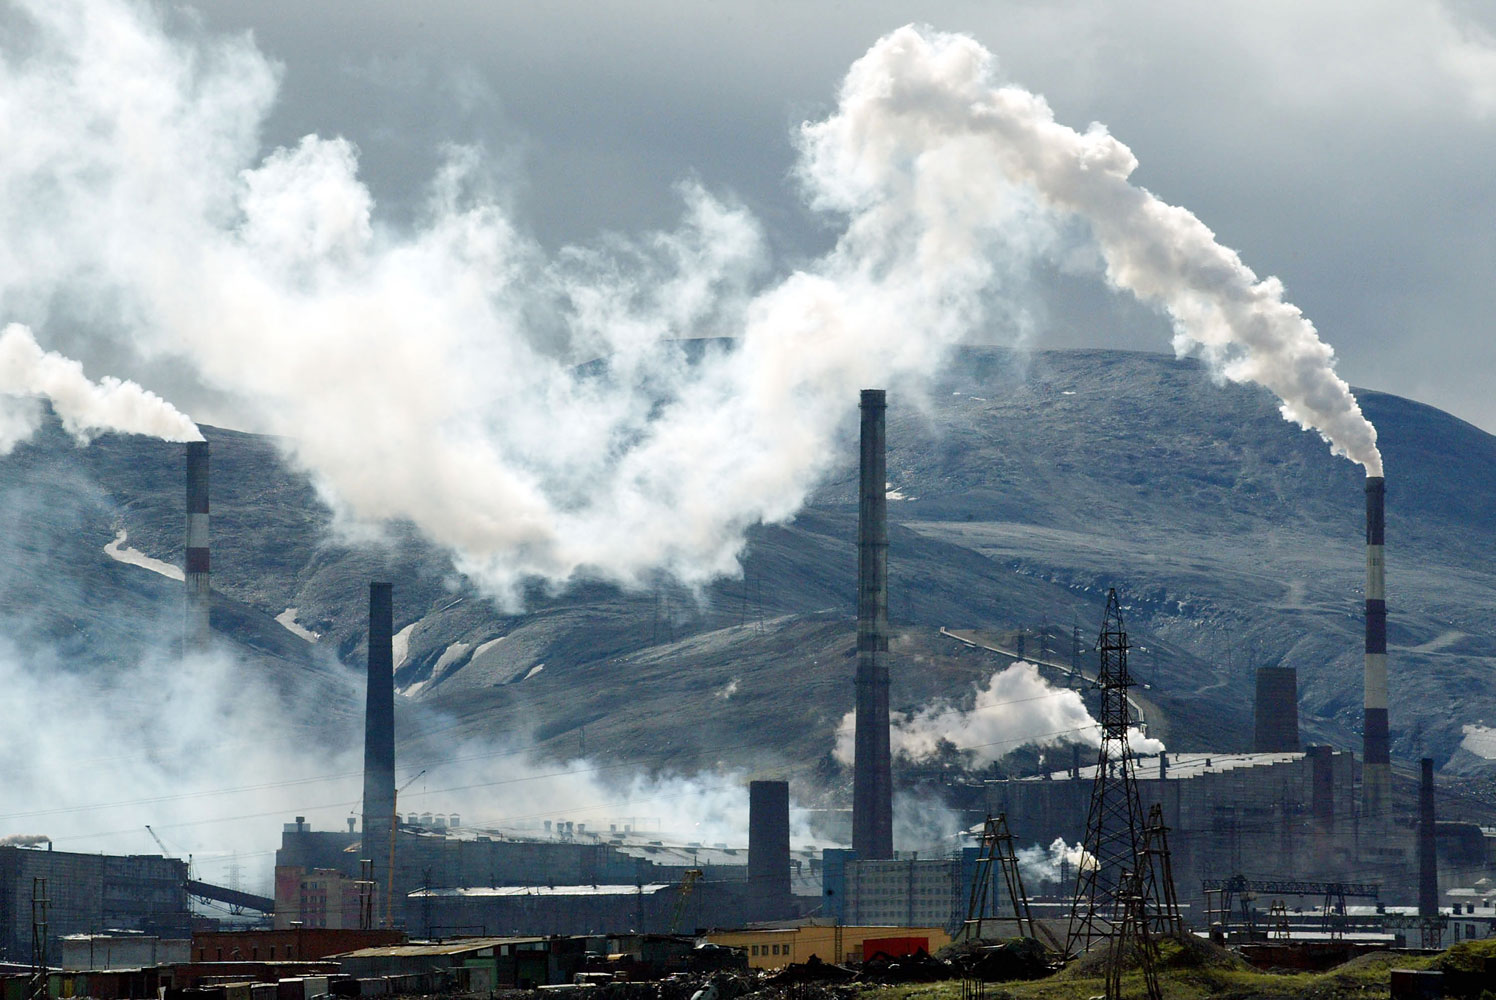 Norilsk industry is the main cause of air pollution